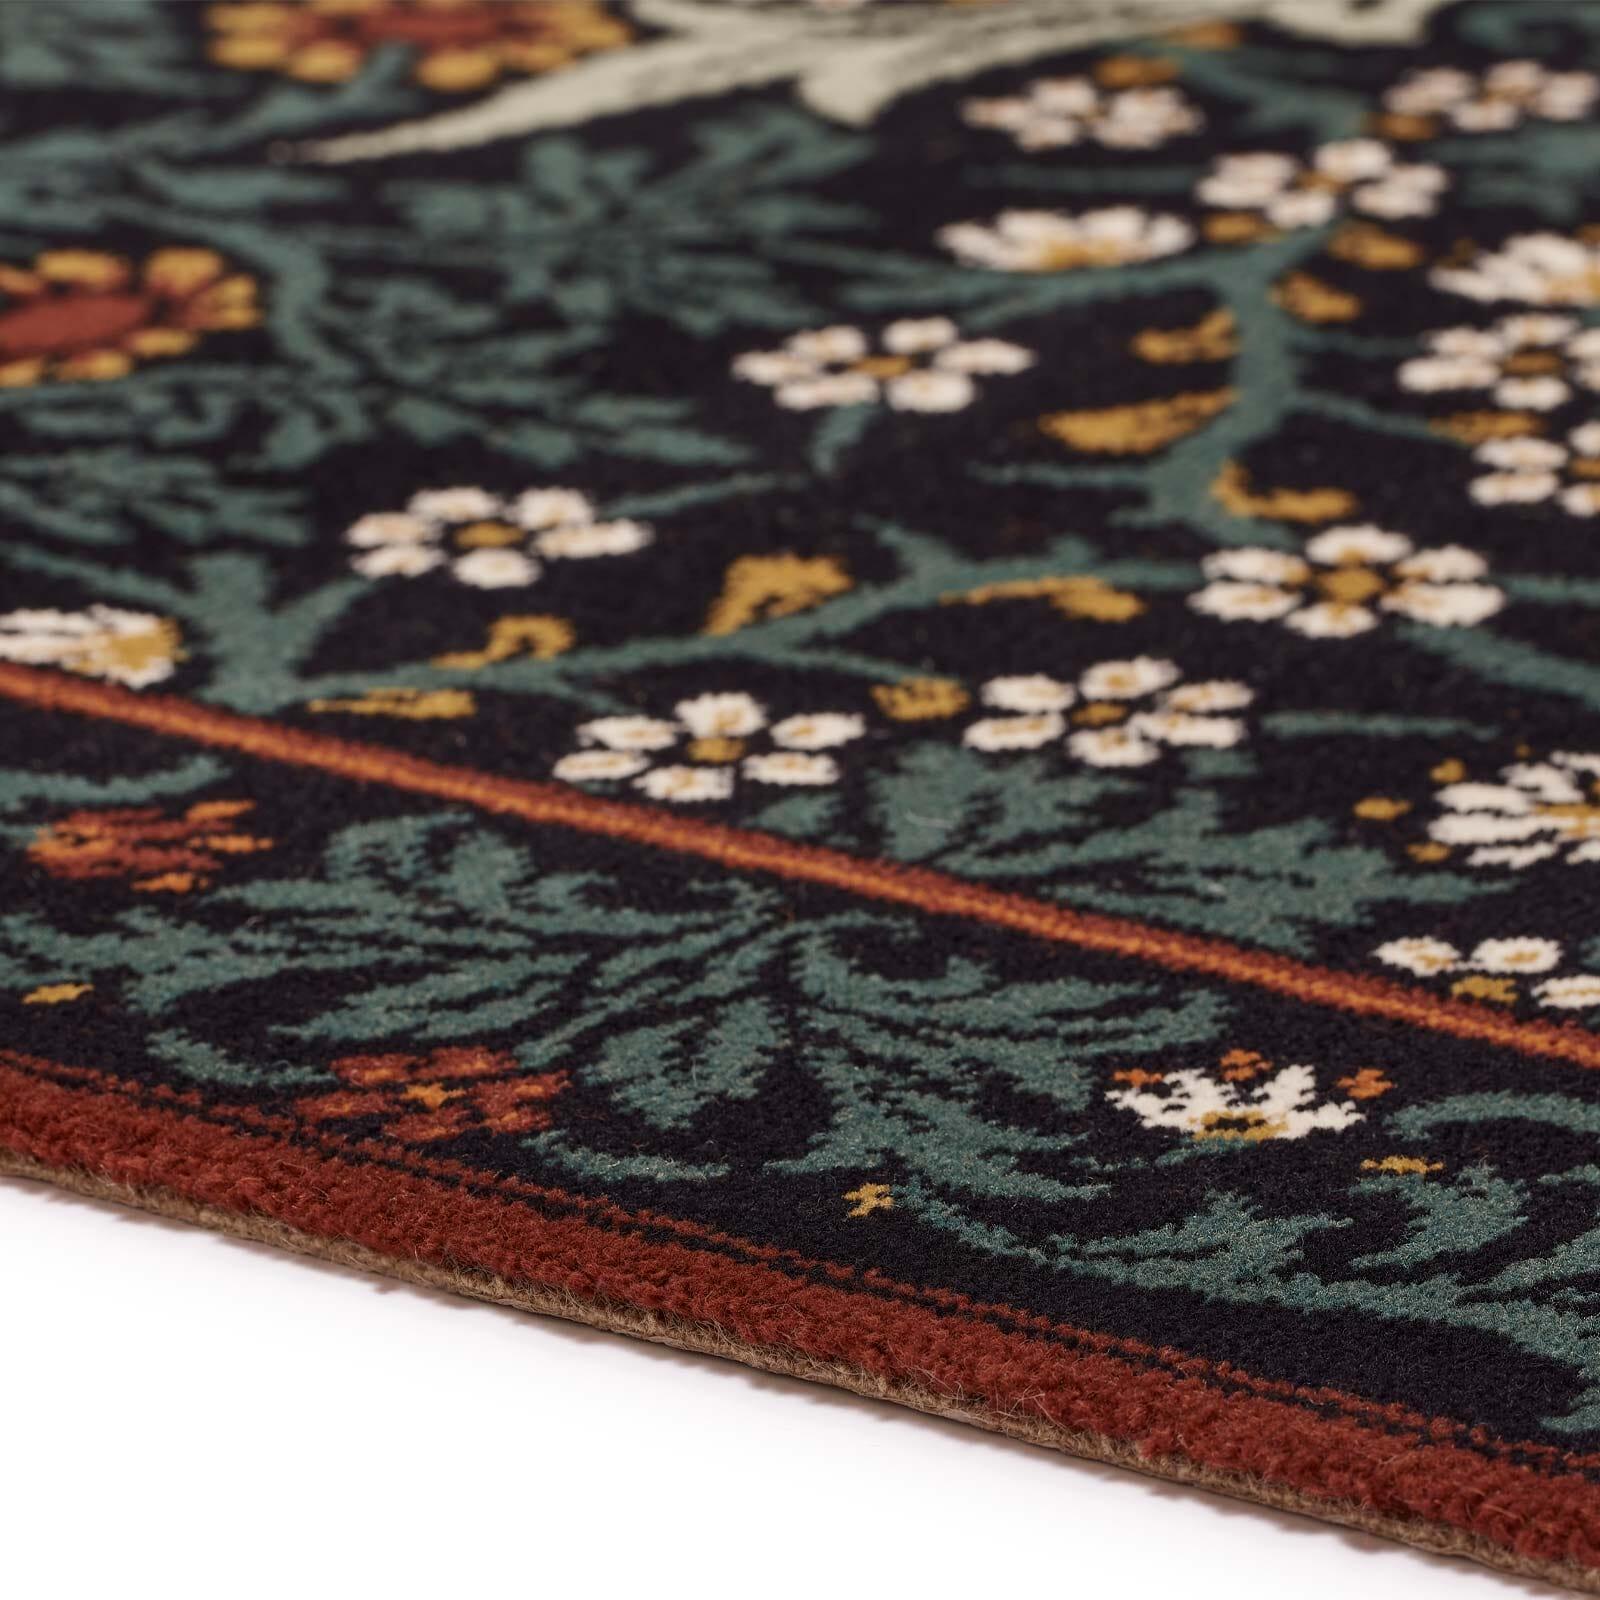 Here's a rug that brings new meaning to the phrase 'history in the making'. While its Art Nouveau motif, BLACKTHORN, part of our collaboration with the William Morris Gallery, dates back to 1892, this design is woven from sumptuous British wool by